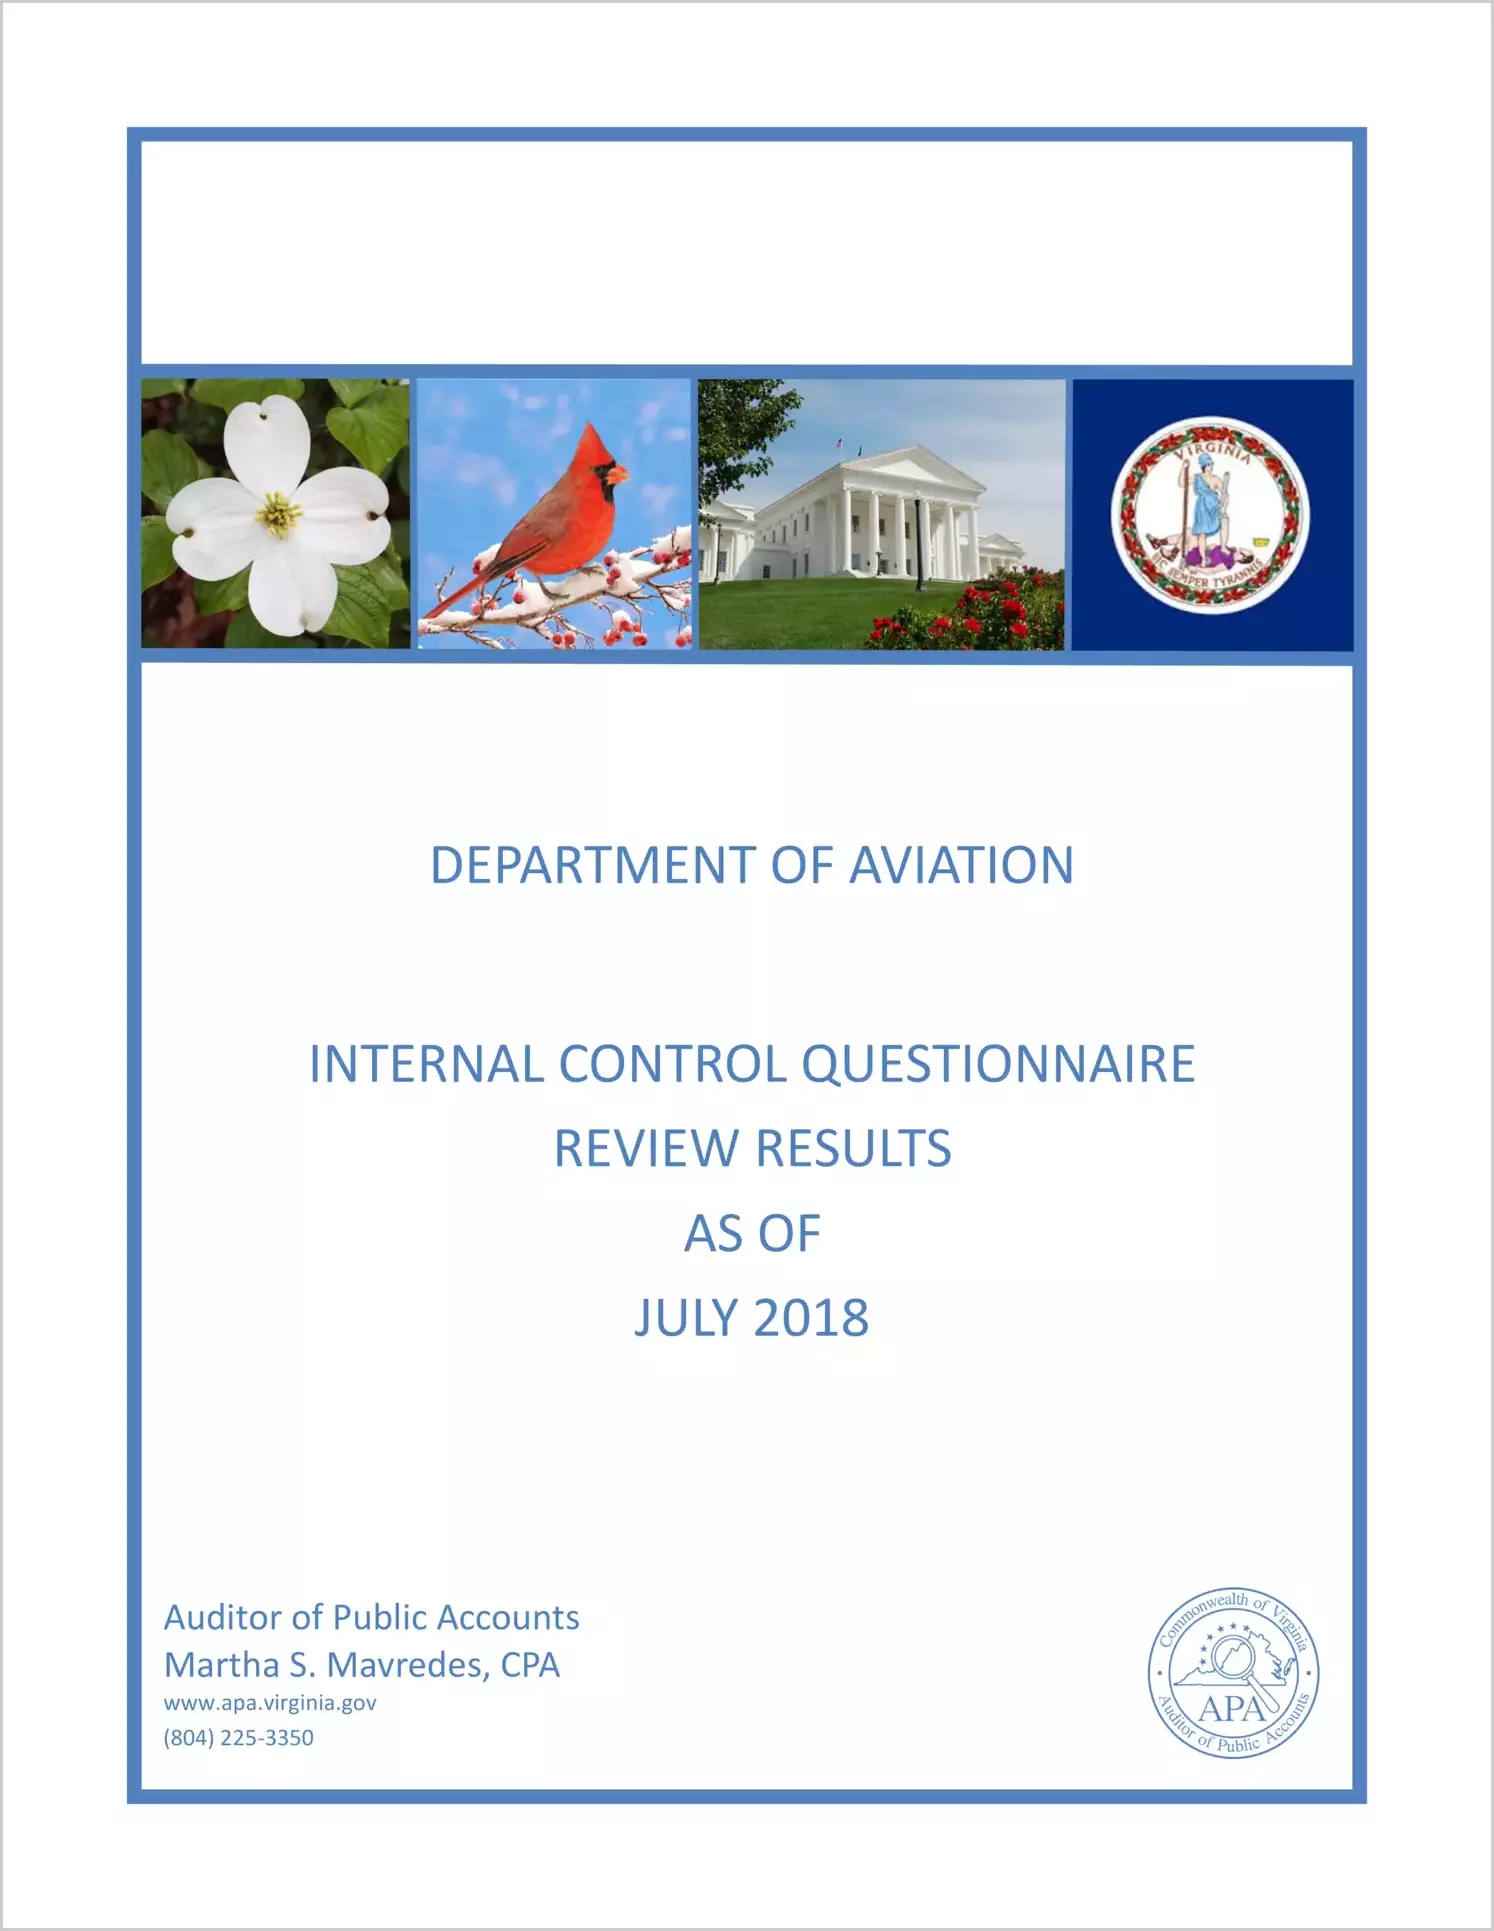 Department of Aviation Internal Control Questionnaire Review Results as of July 2018